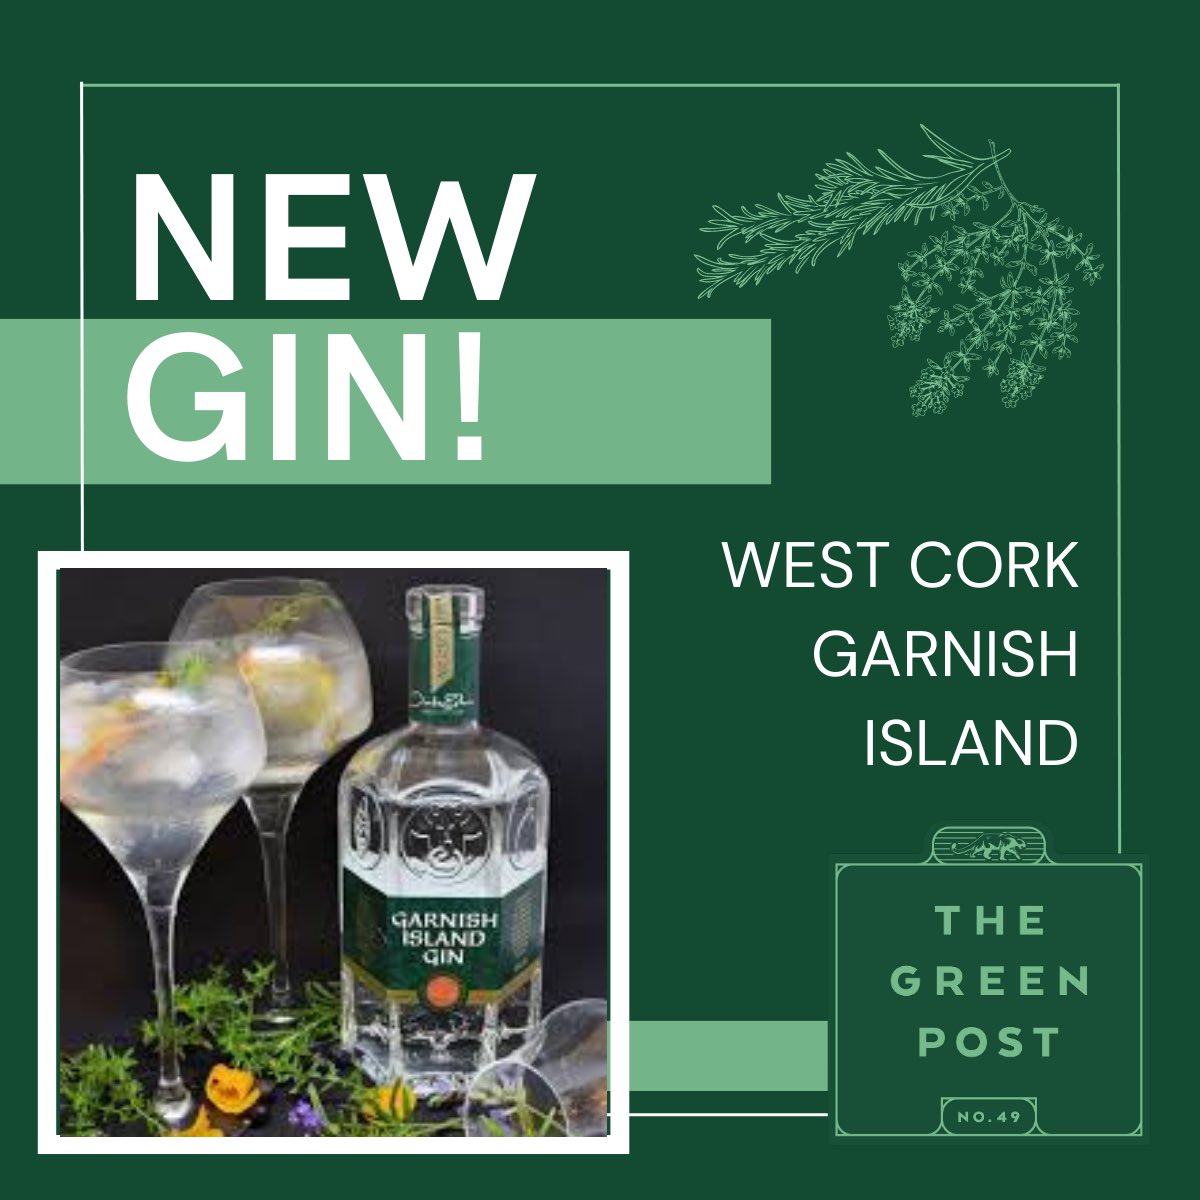 New Gin Alert!!!! Introducing West Cork Garnish Island Gin - Happy Hump Day!

#greenpostcafe #greenpostpub #lincolnsquare #humpday #humpdayvibes #humpdaymotivation #ginlover #wednesday #happyhour